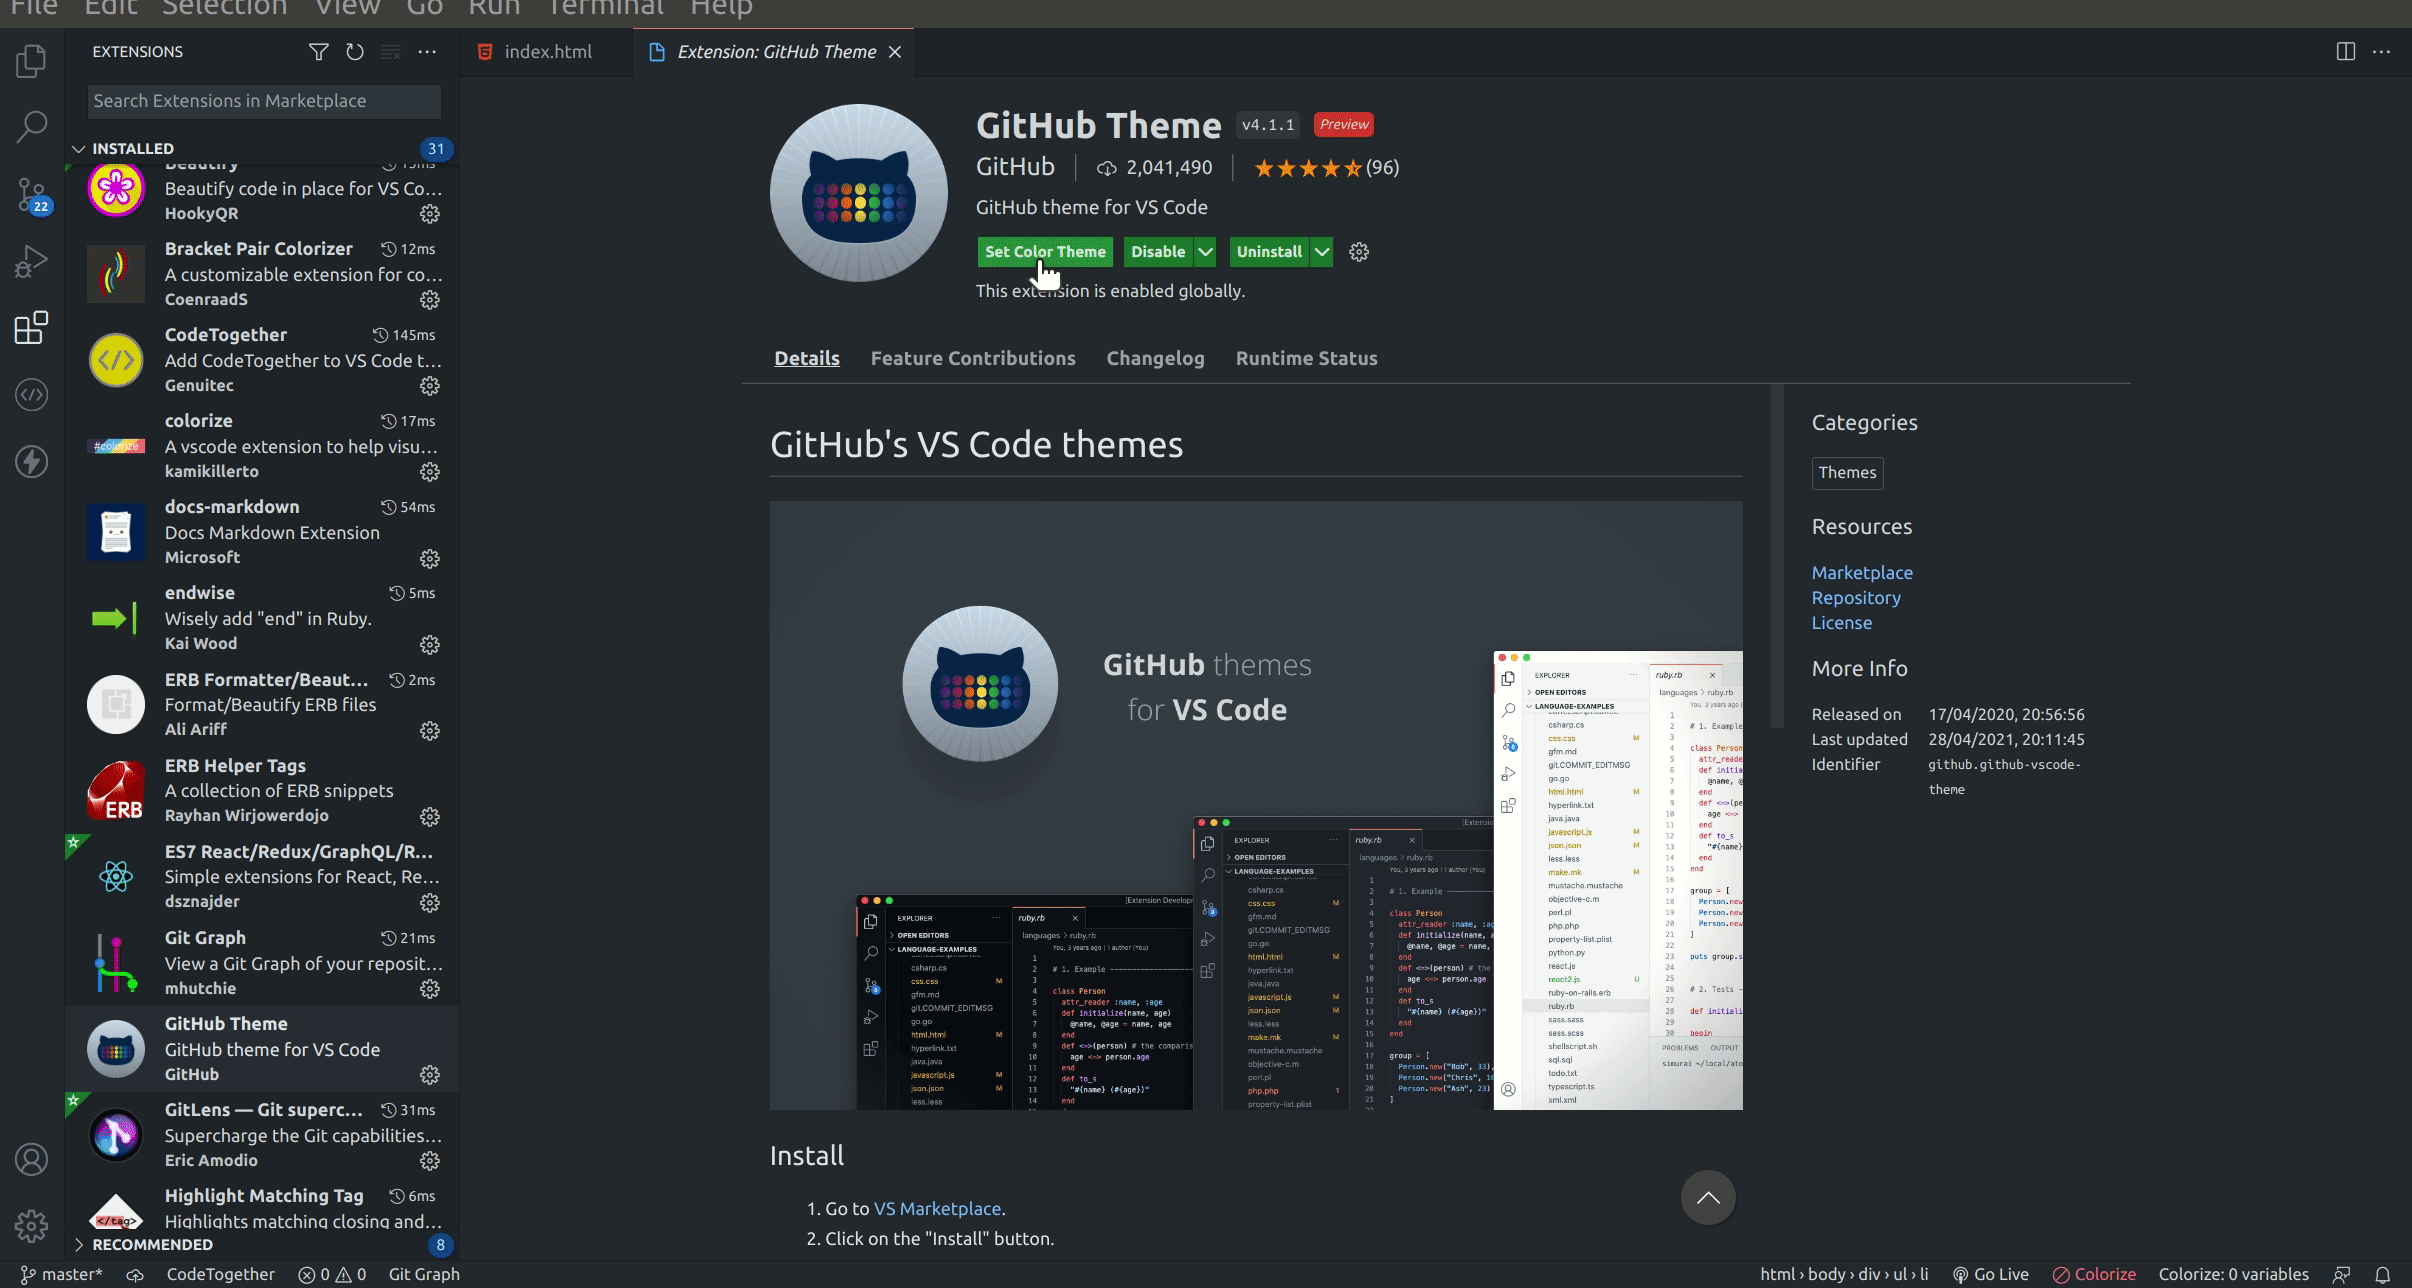 Github theme VScode extension Preview